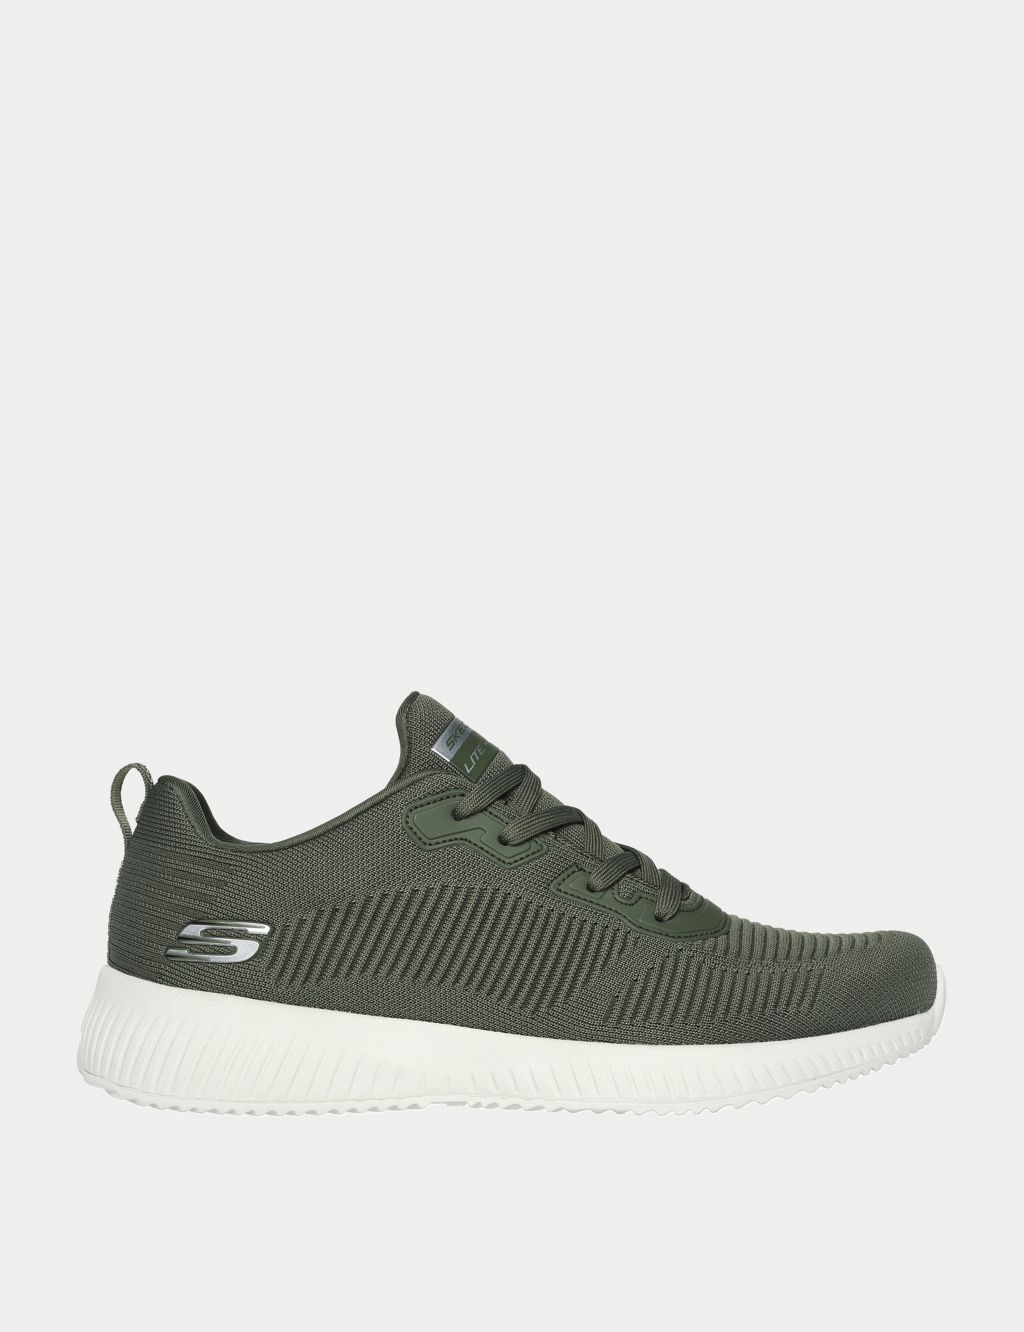 Squad Lace Up Trainers image 1